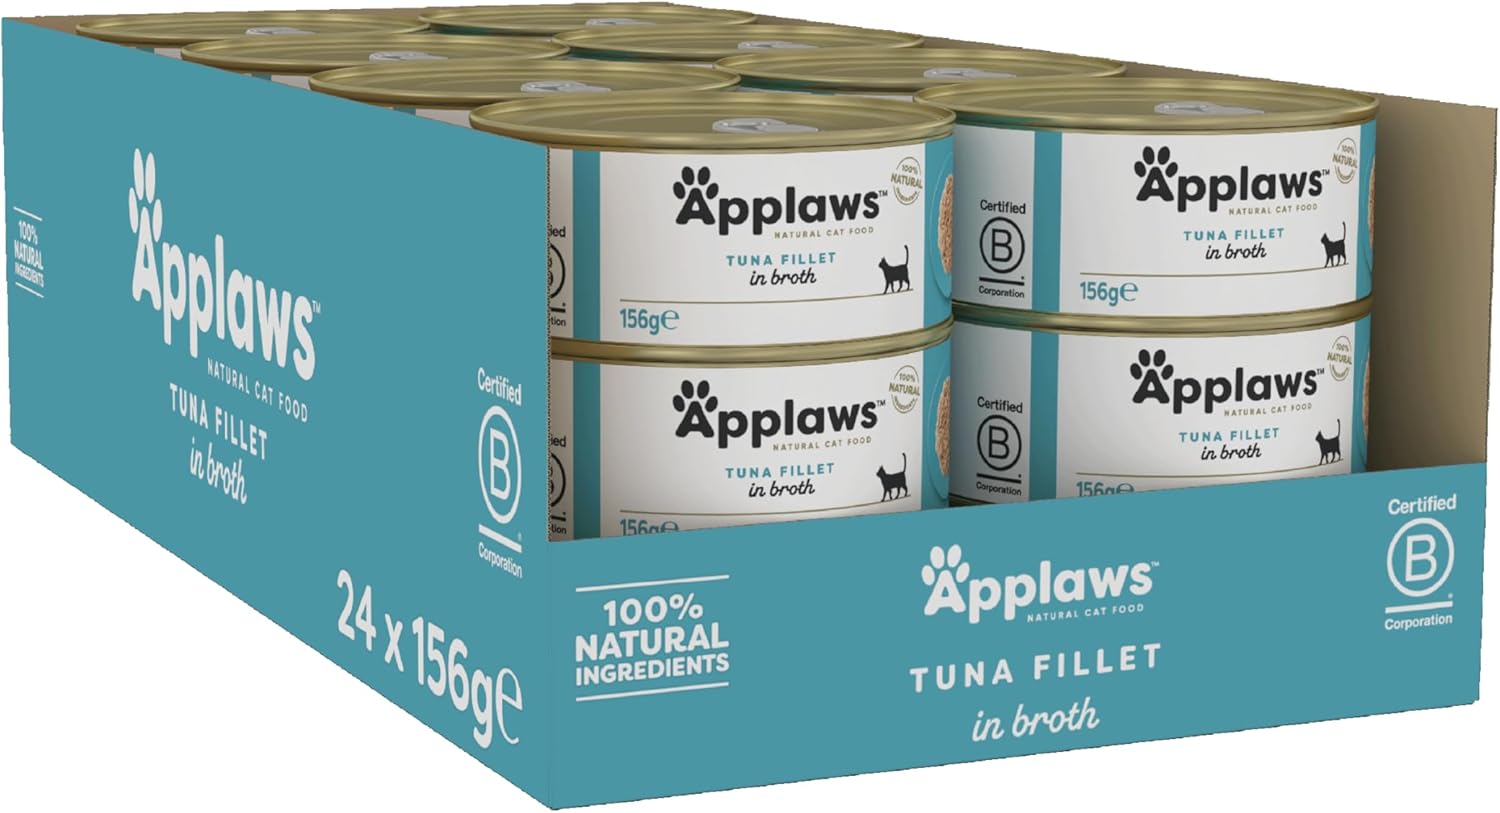 Applaws 100% Natural Wet Cat Food, Tuna Fillet In Broth 156 g Tin (Pack of 24)?2003NE-A